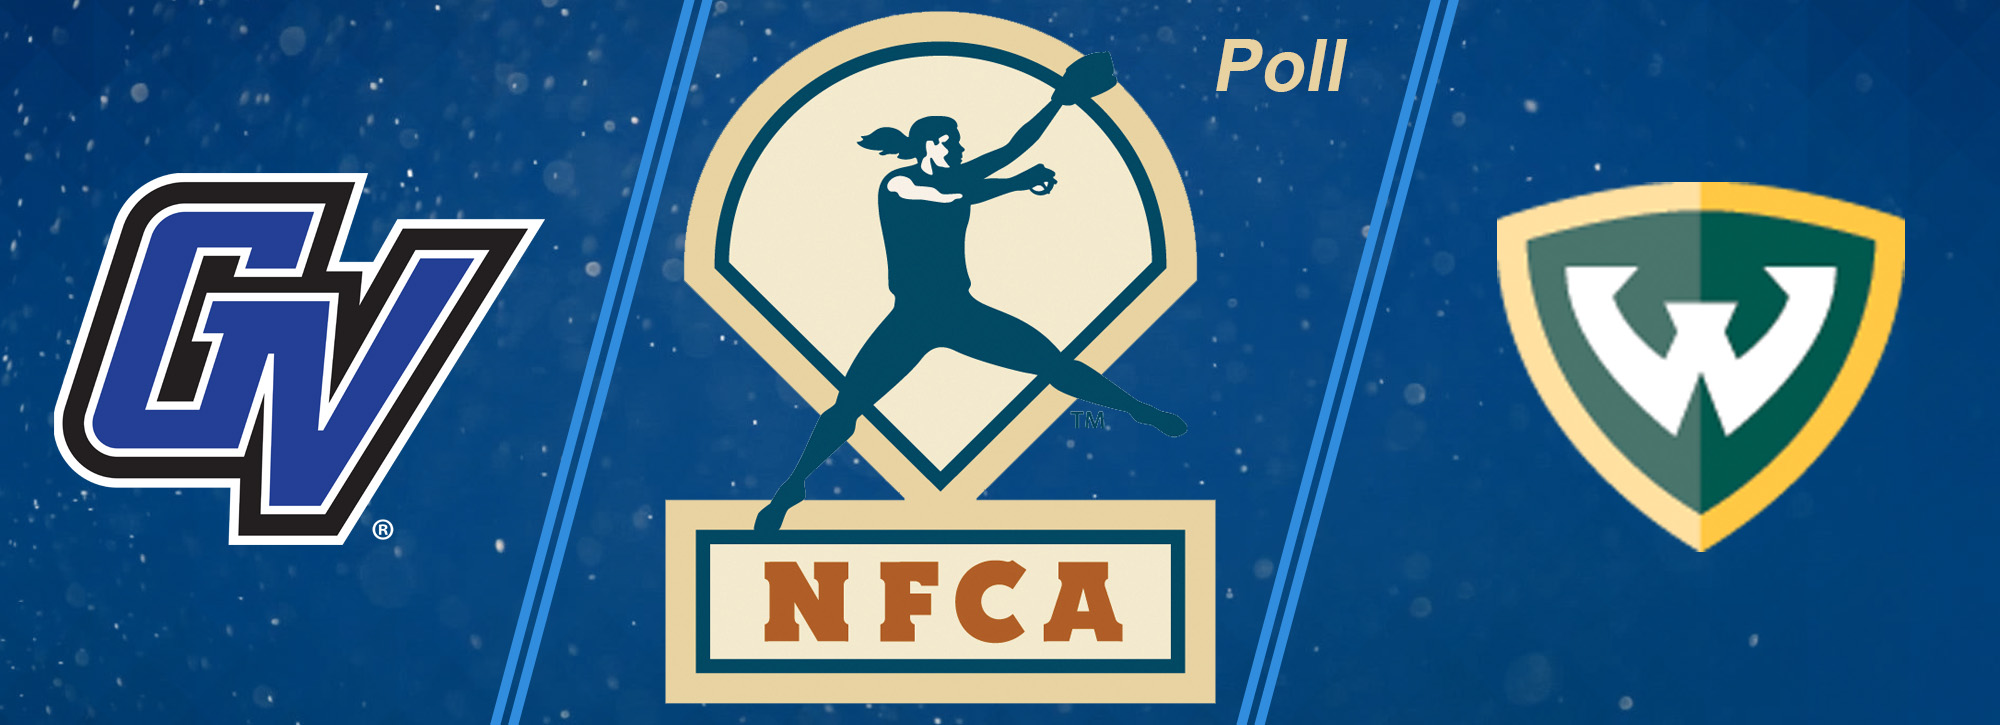 Lakers are ranked 16th in NFCA Pre-Season Coaches' Poll